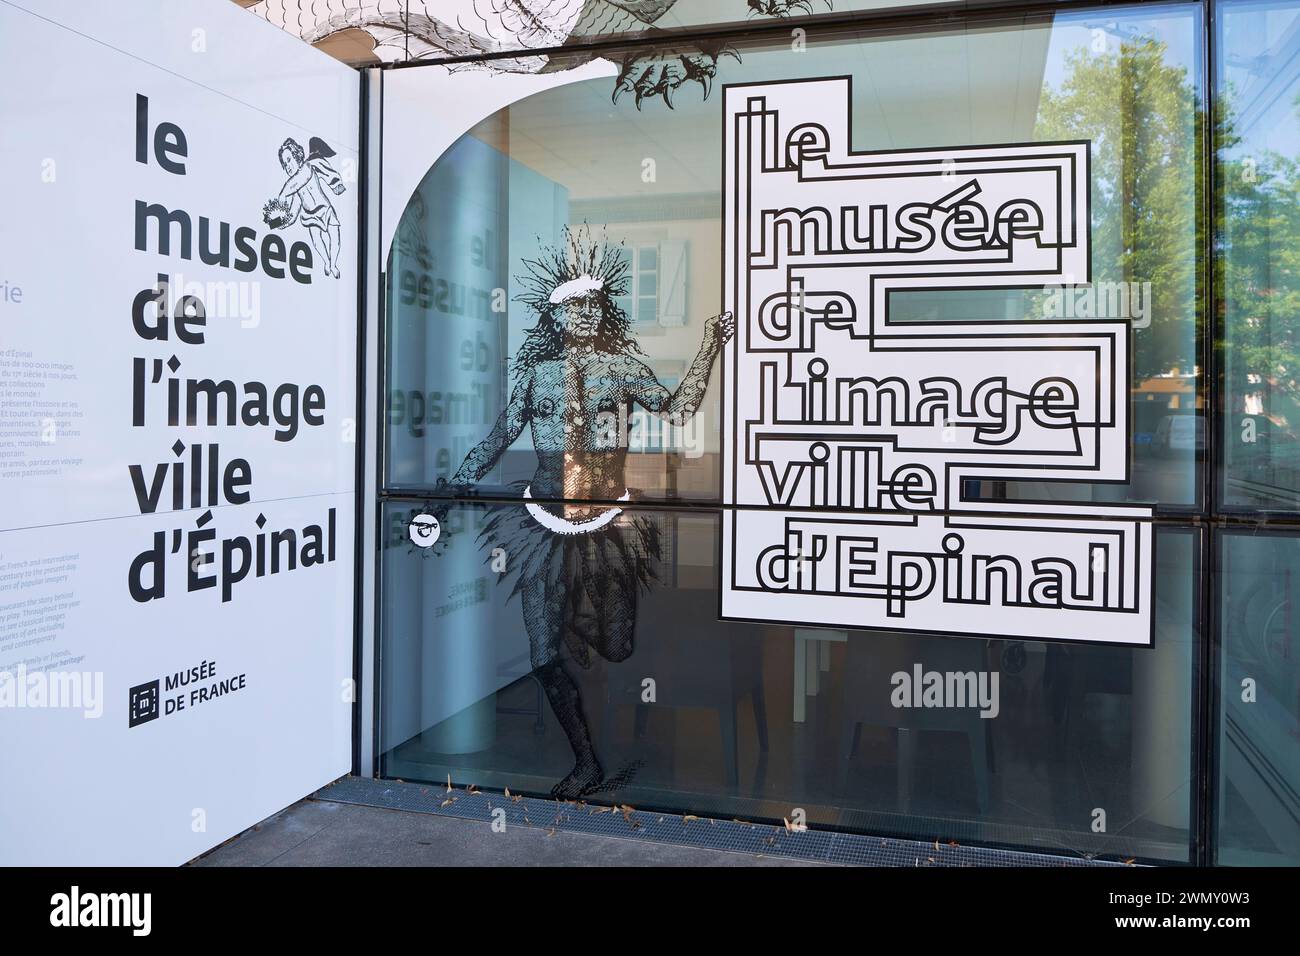 France, Vosges, Epinal, Image museum, the entrance of the glass facade Stock Photo